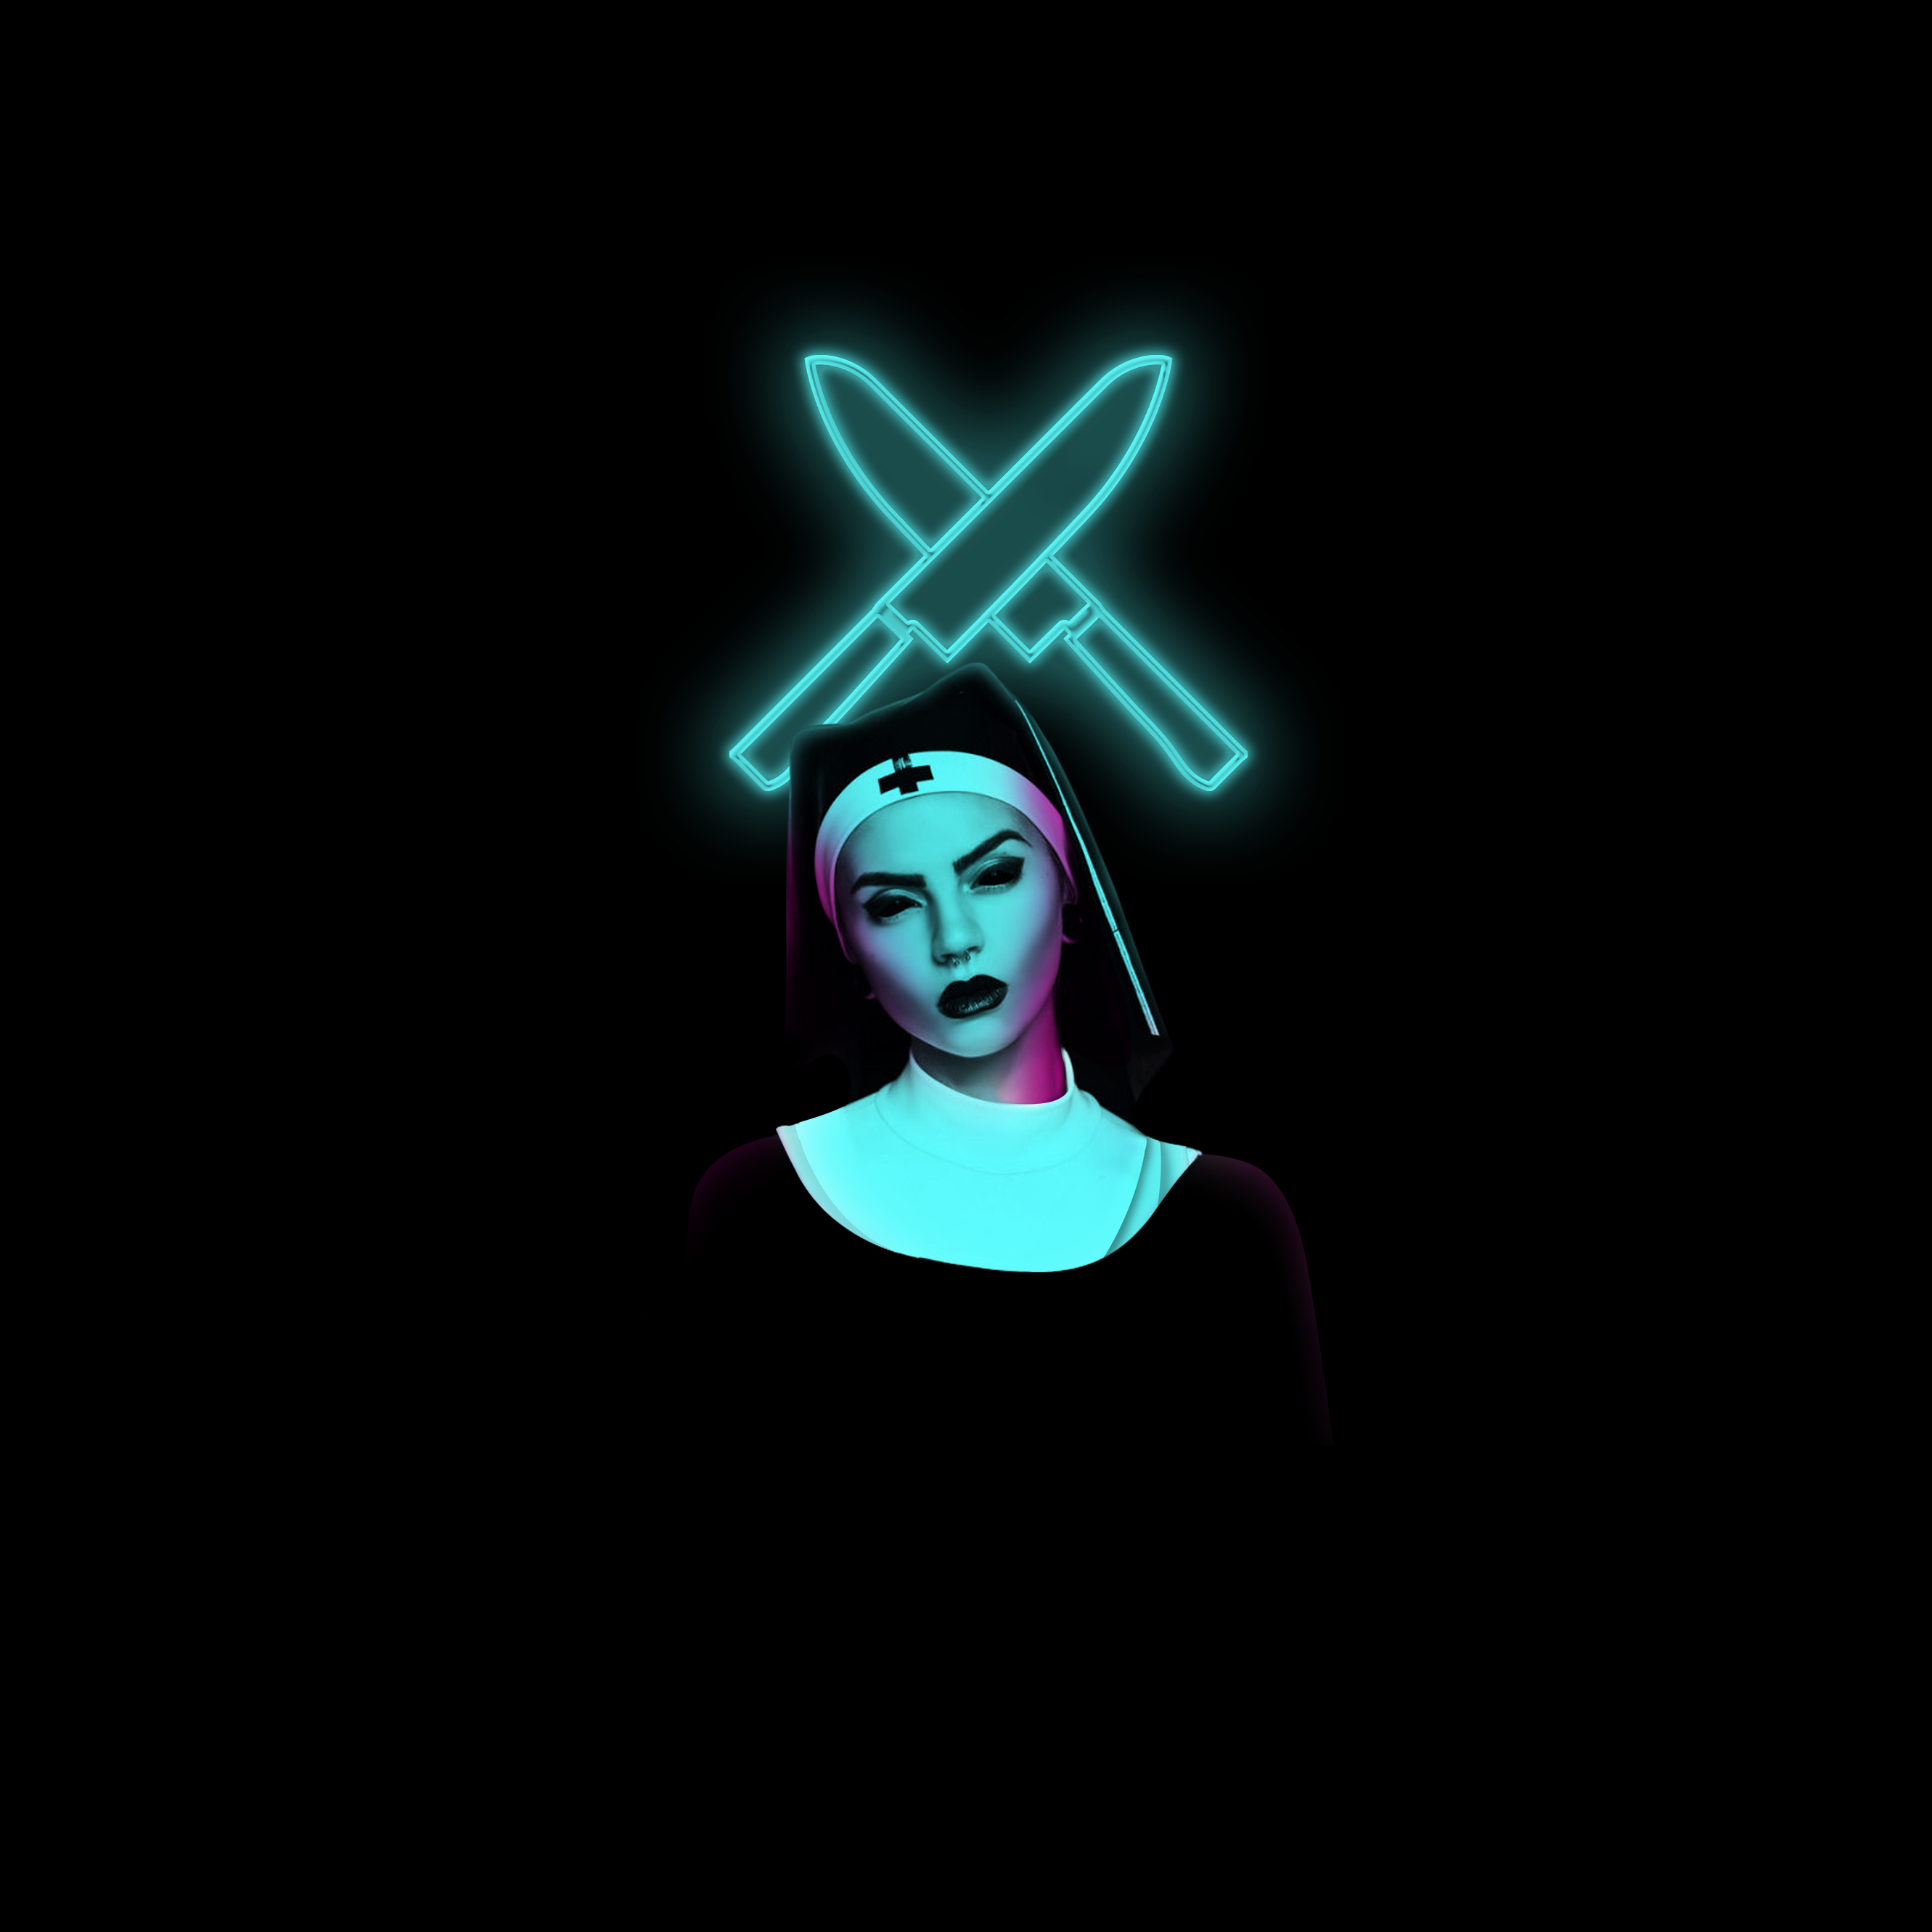 I need this wallpaper without the neon knives please, keeping